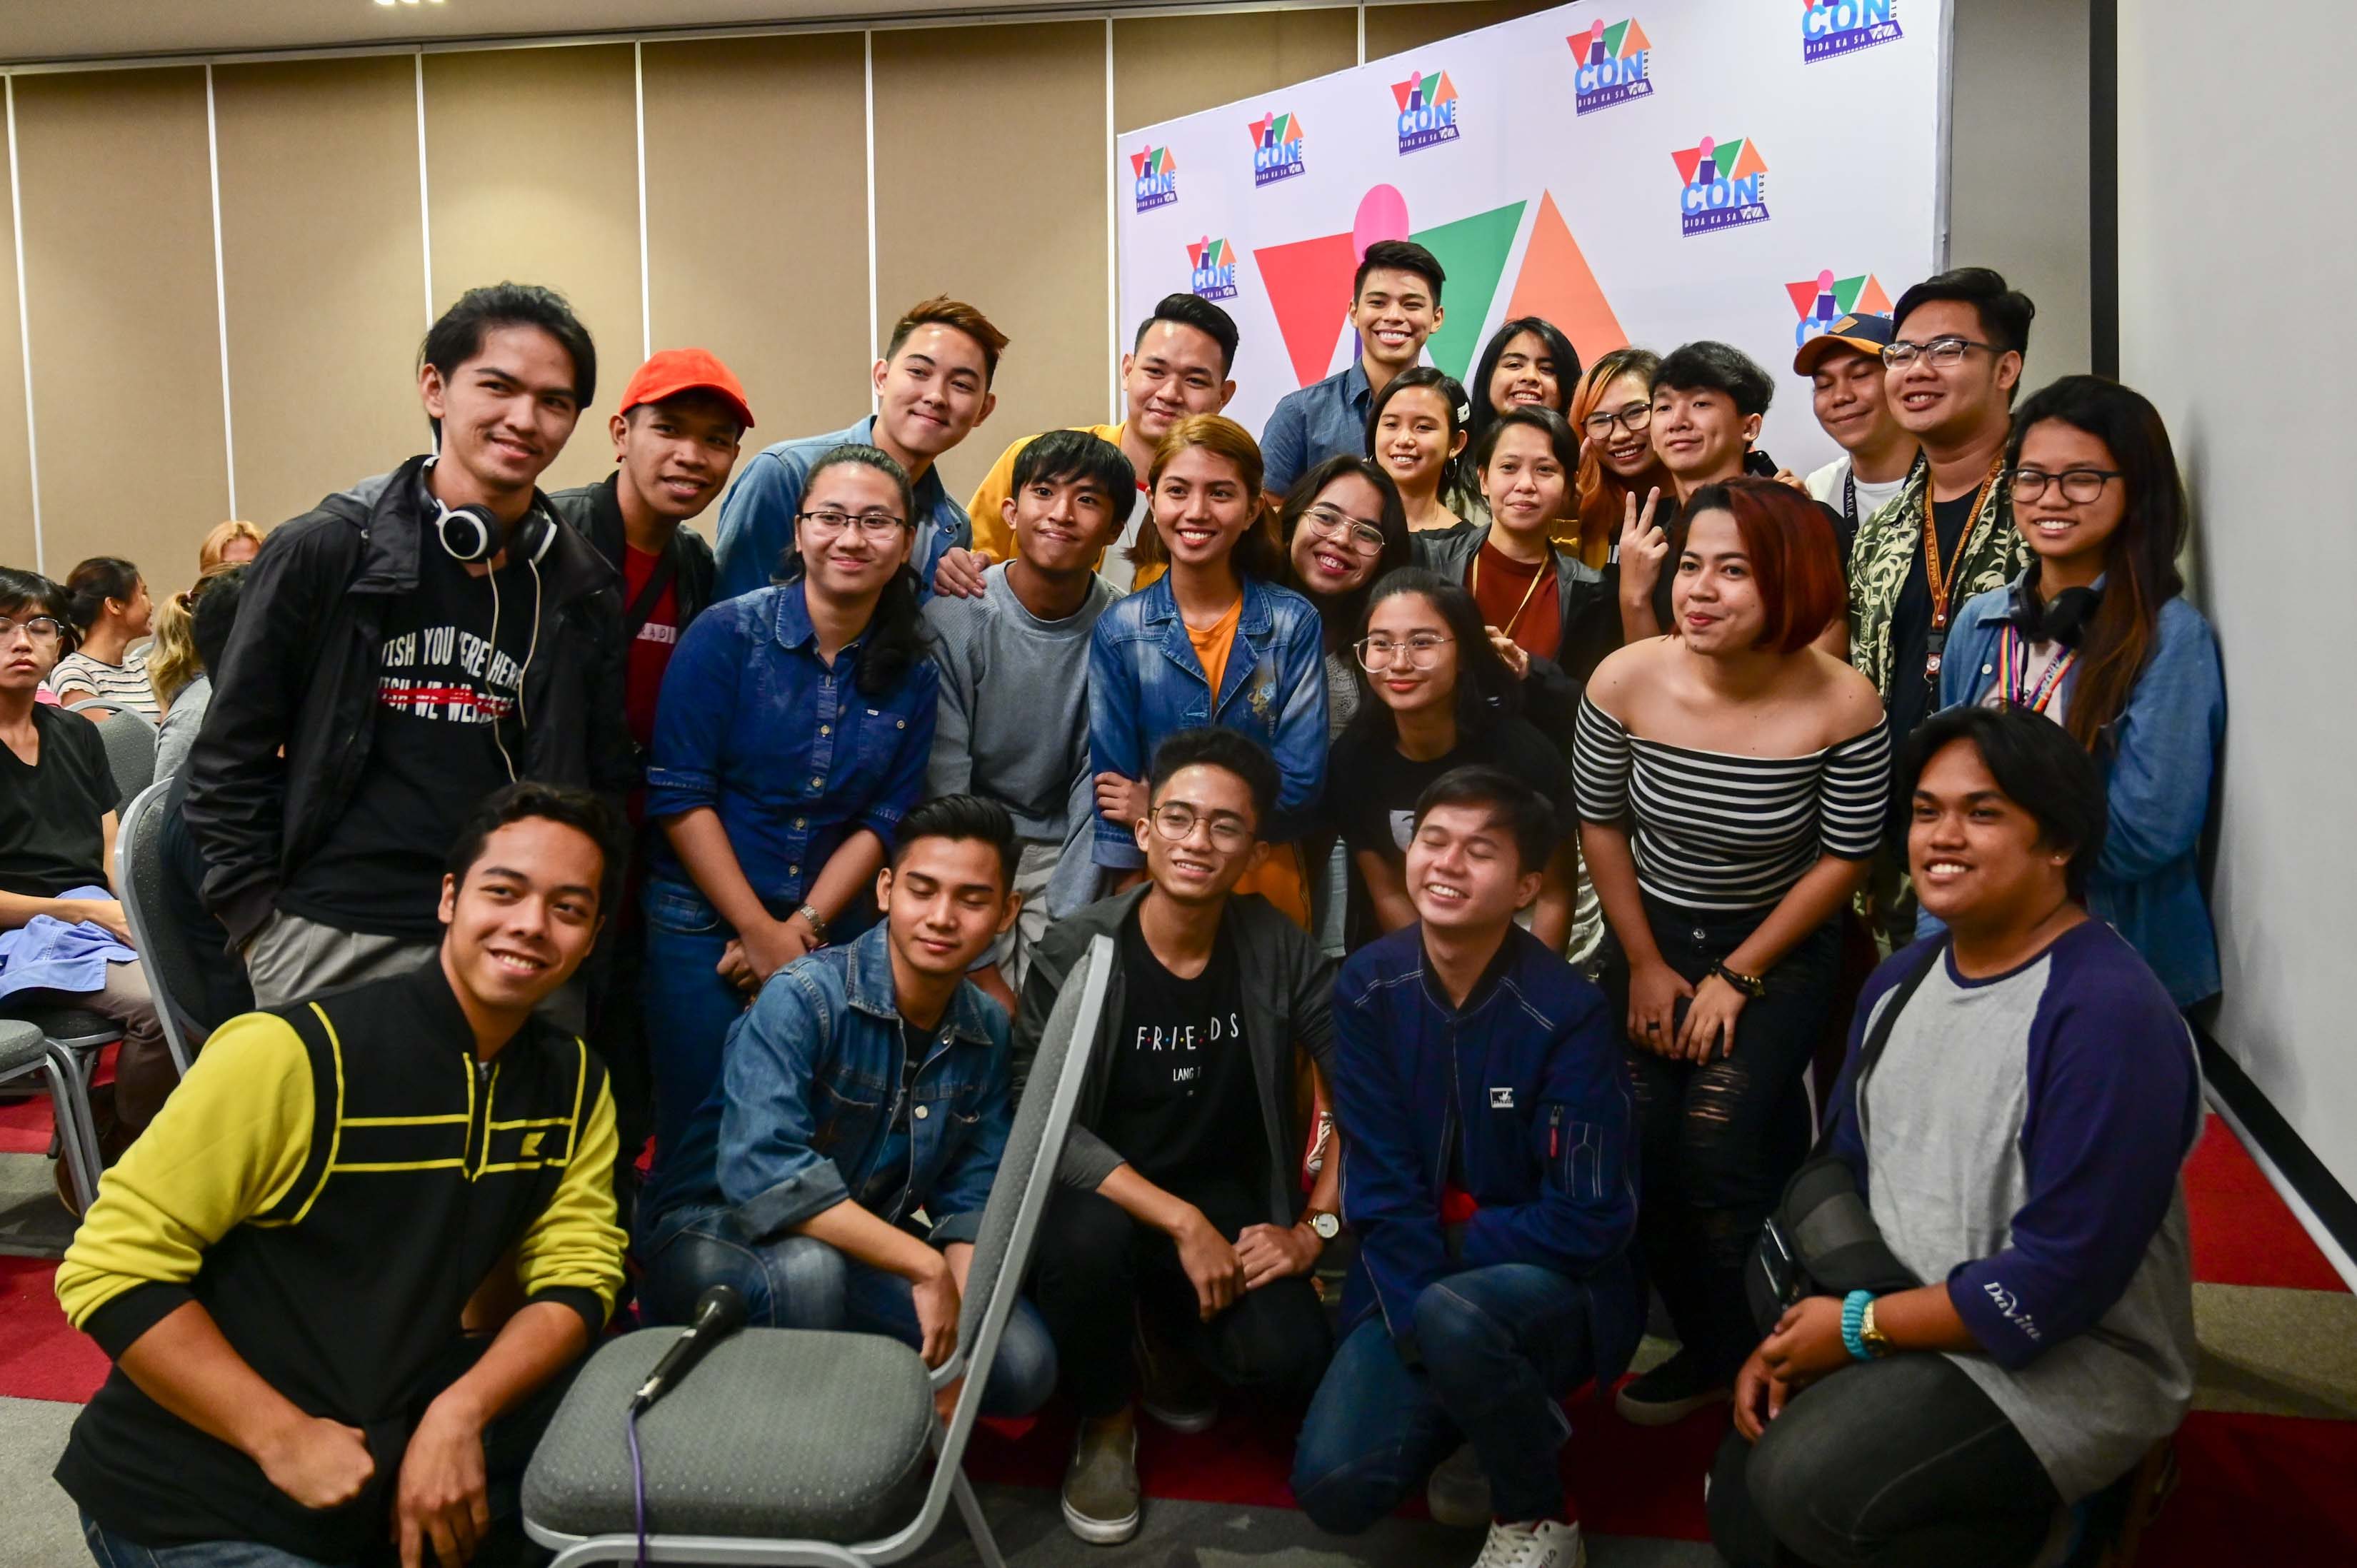 IN PHOTOS: Here's what happened at the first ever Viva Convention